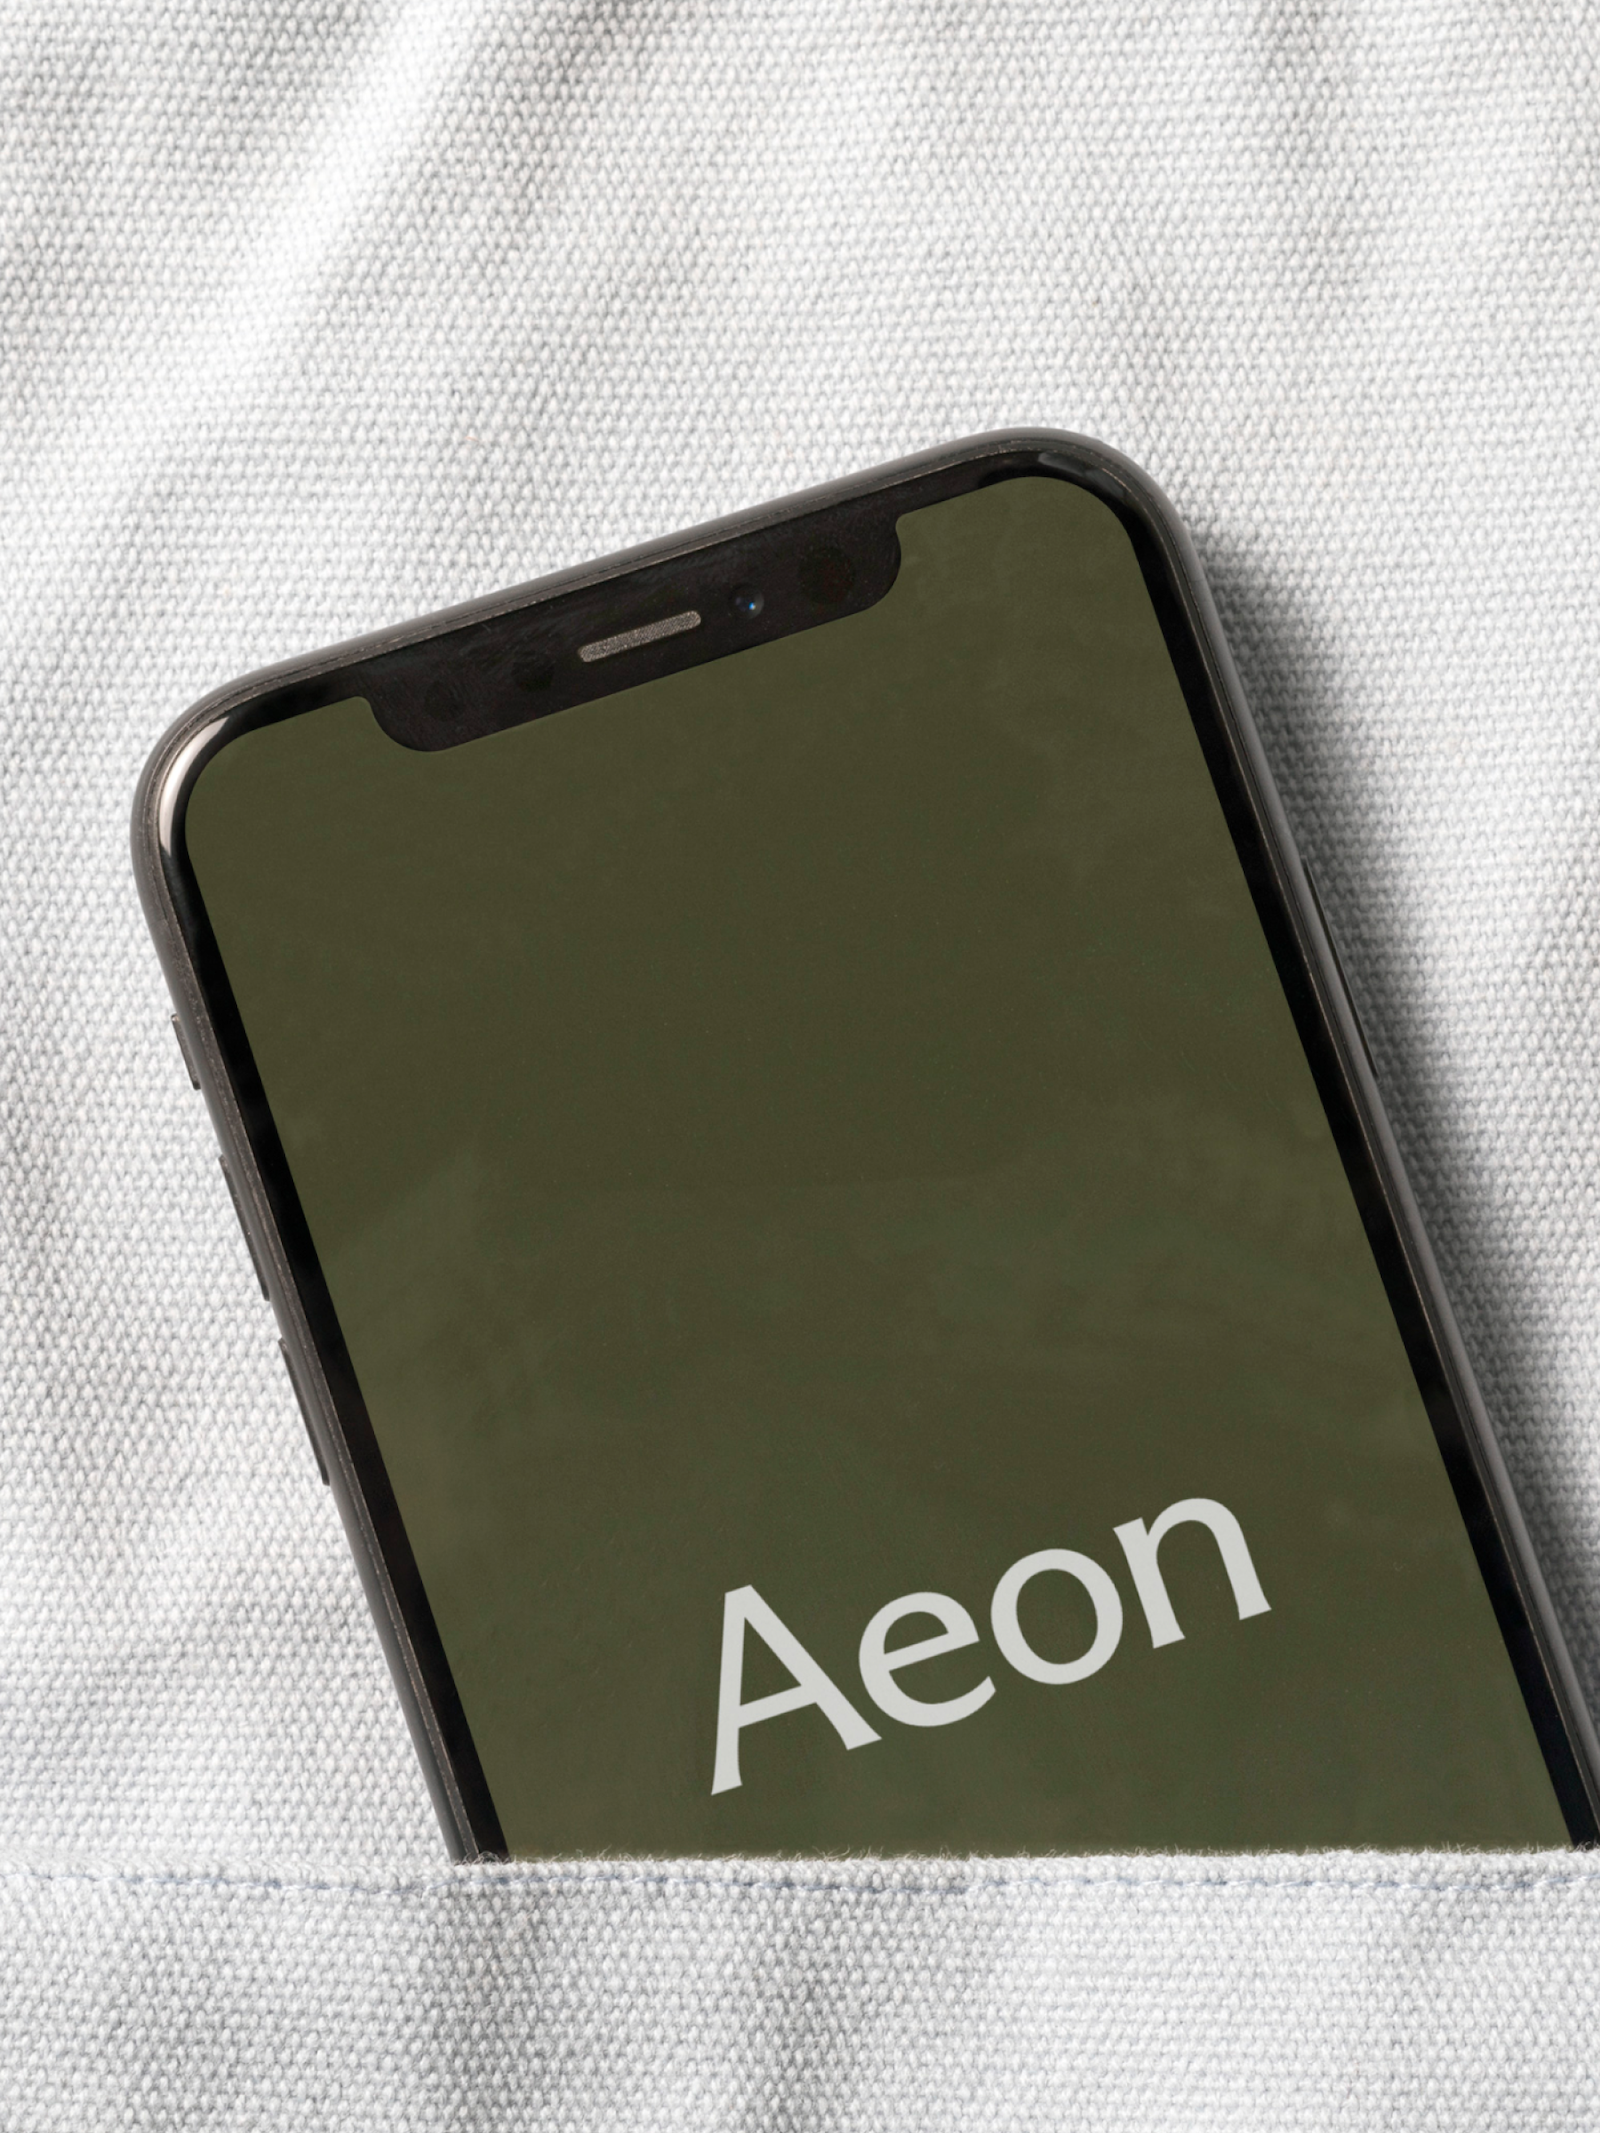 A close-up image of a white lab coat, shows the AEON logotype